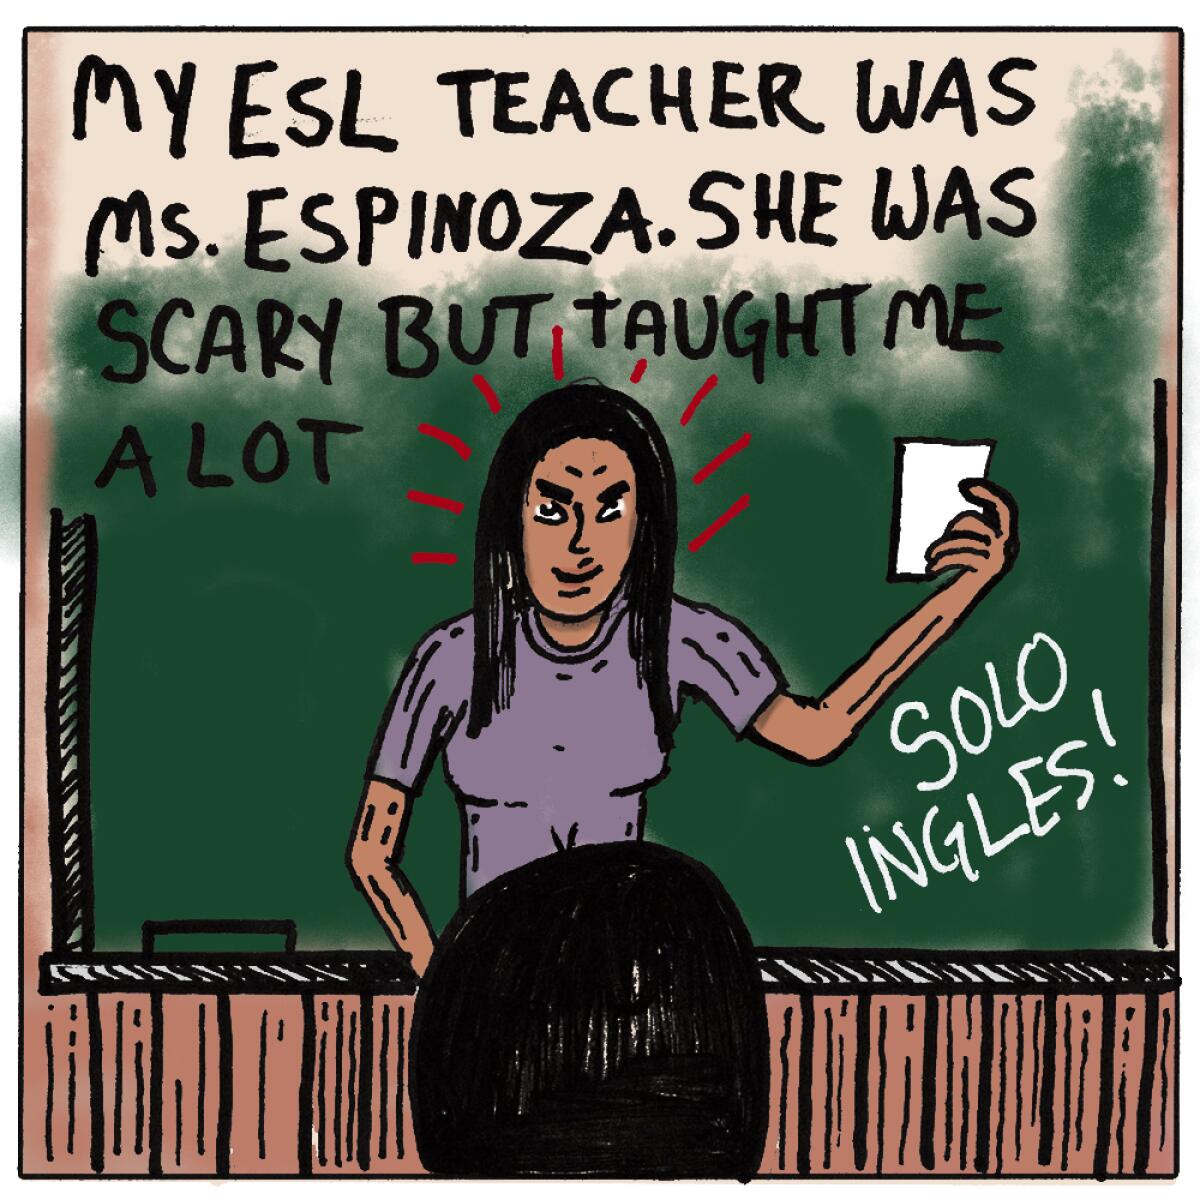 My ESL teacher was Ms. Espinoza. She was scary but taught me a lot. 